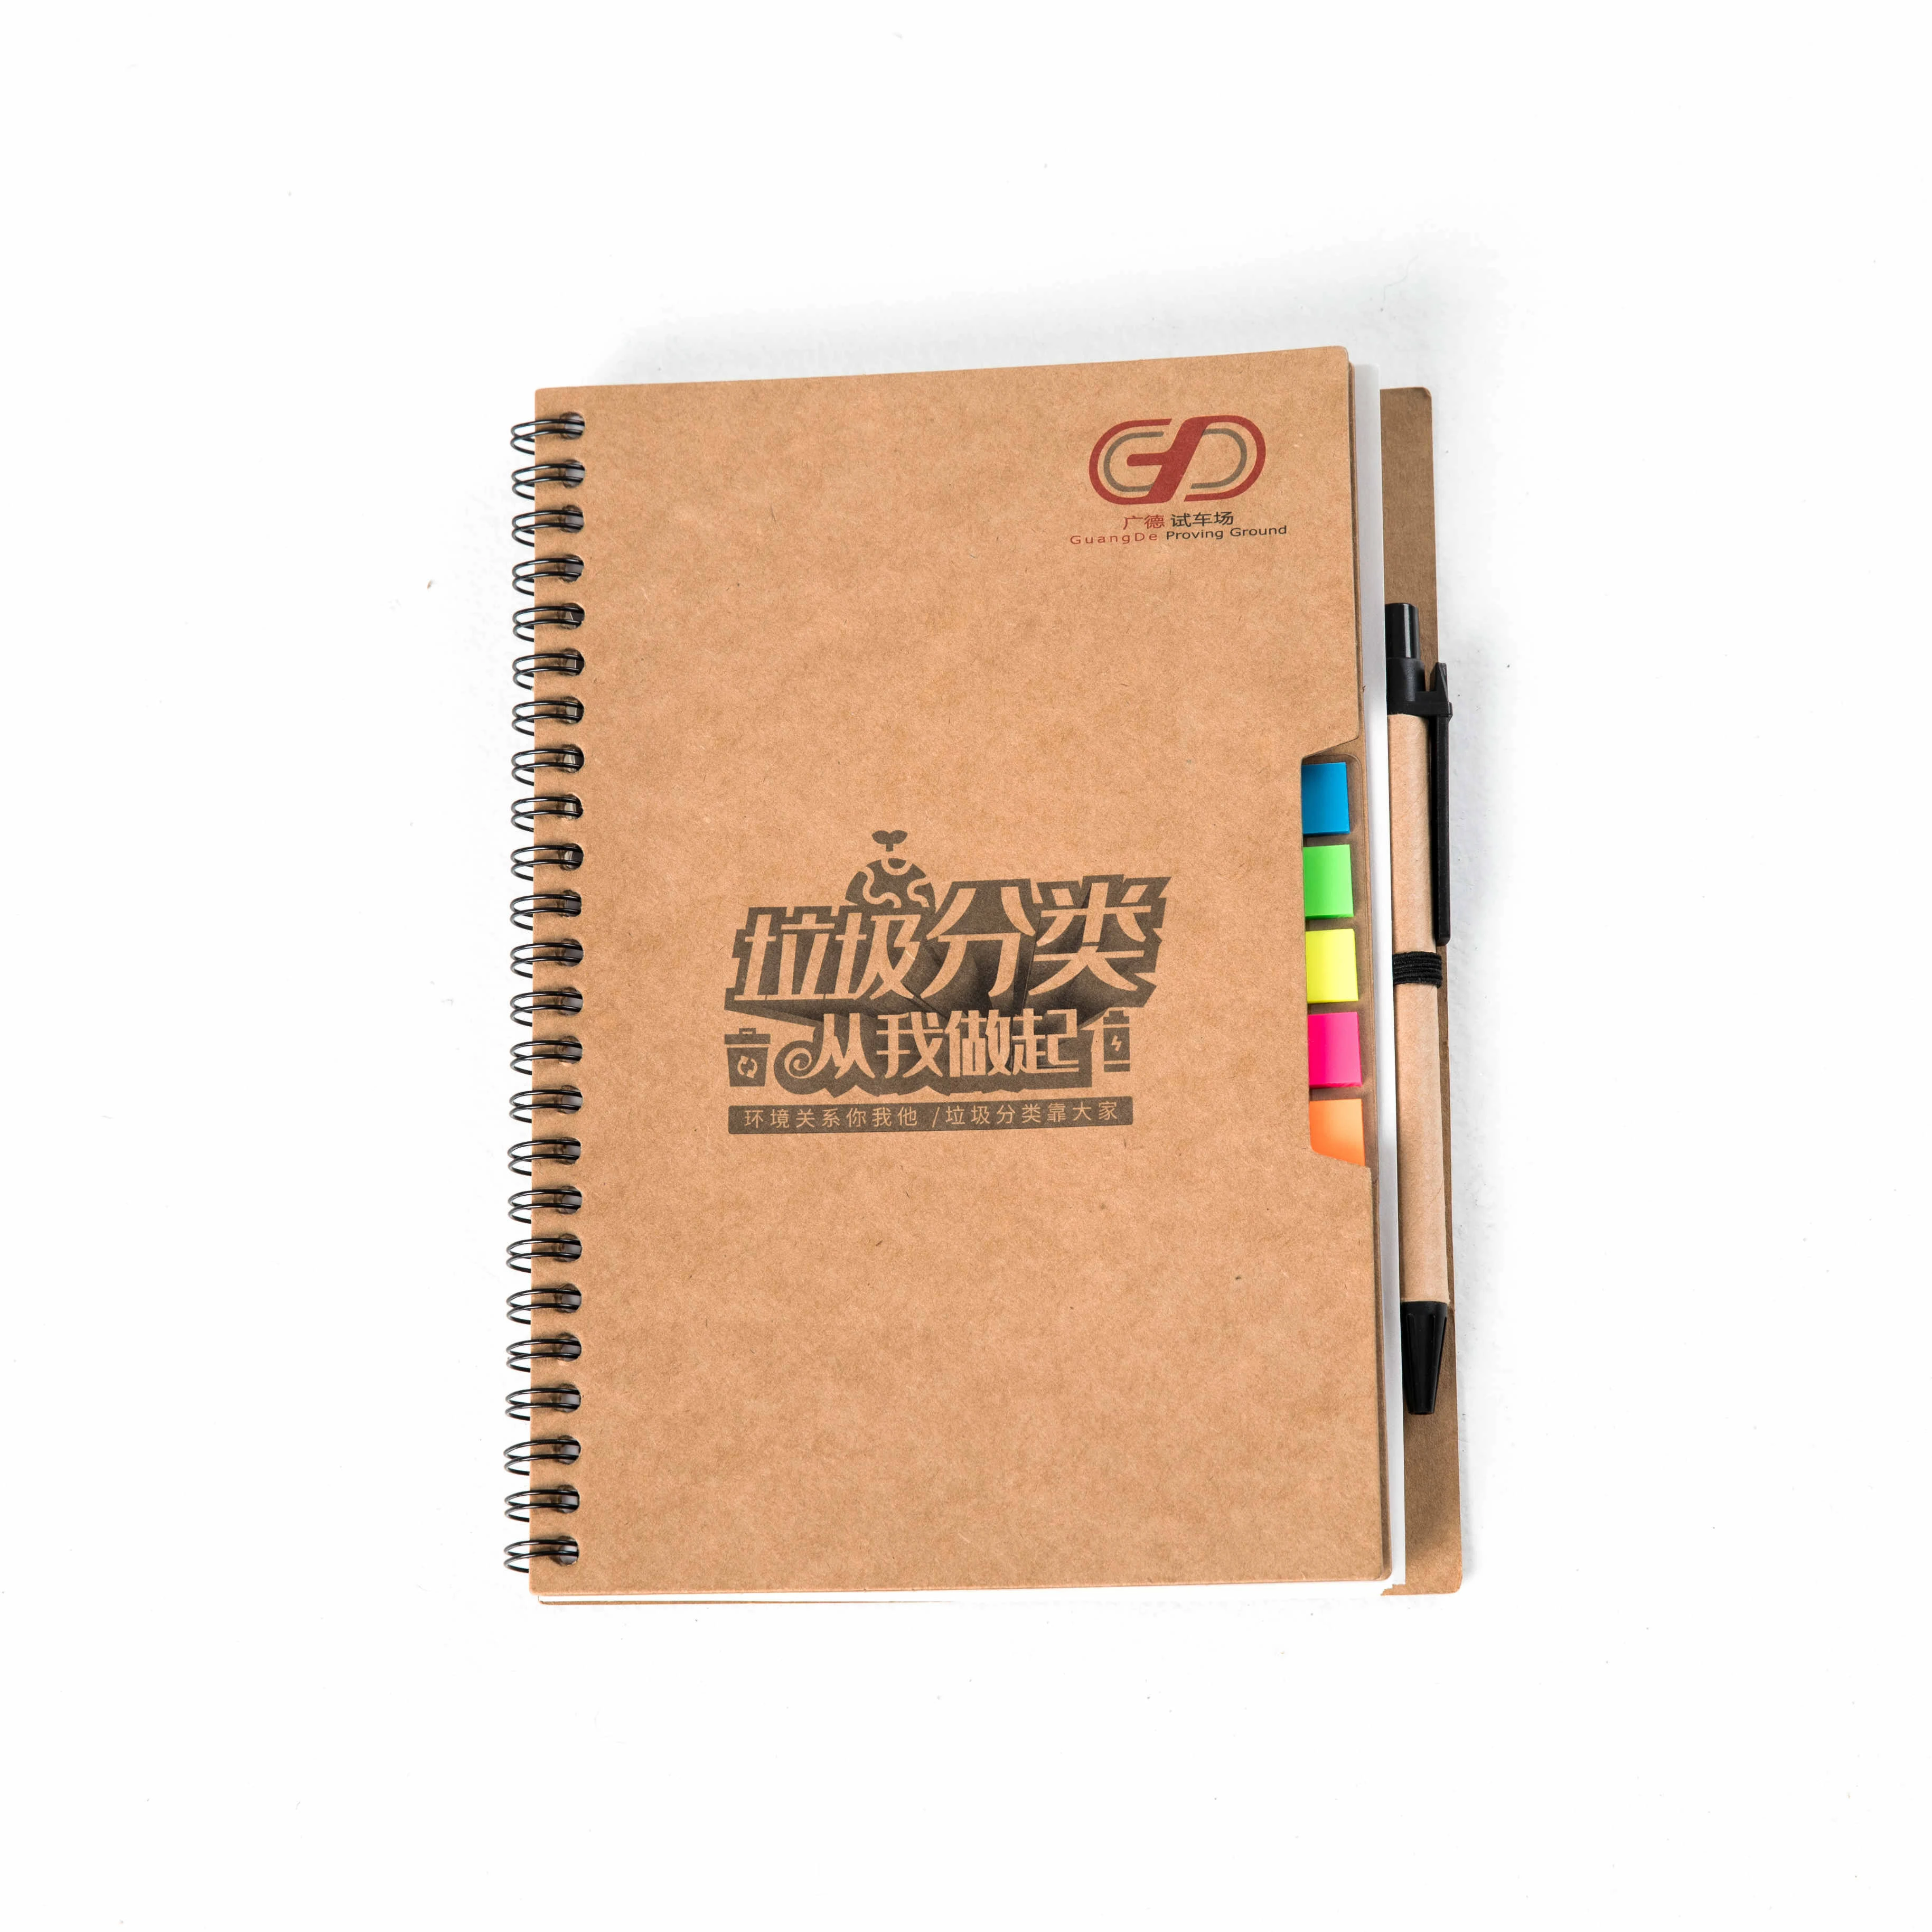 A5 Spiral Notebook Removable Sticky Spiral Notebook with Colored Paper Address Book 80 Sheets Gift with Pen for School